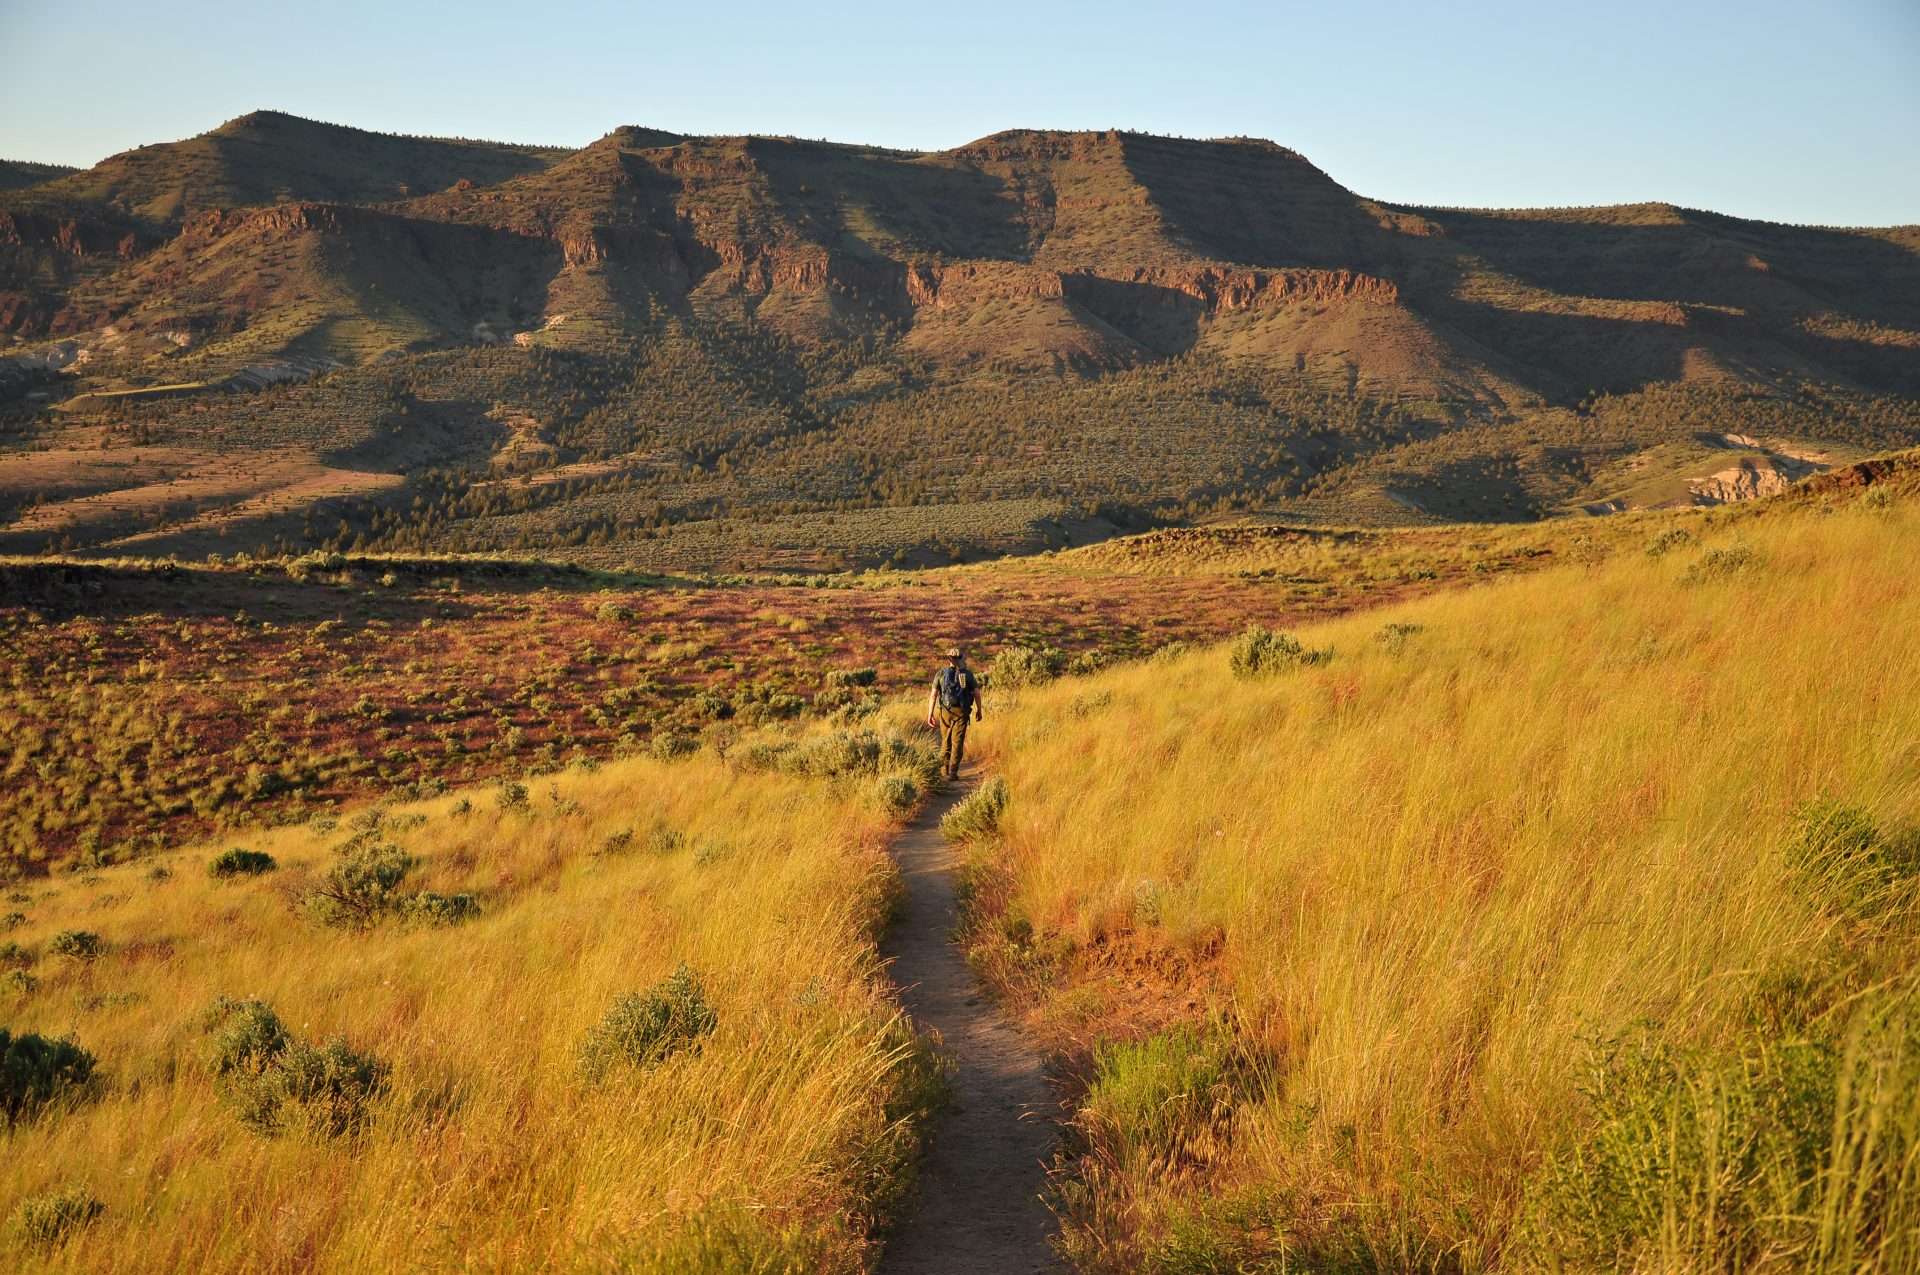 A man hikes away from the camera on a trail through dry grass with a mountain rising beyond.